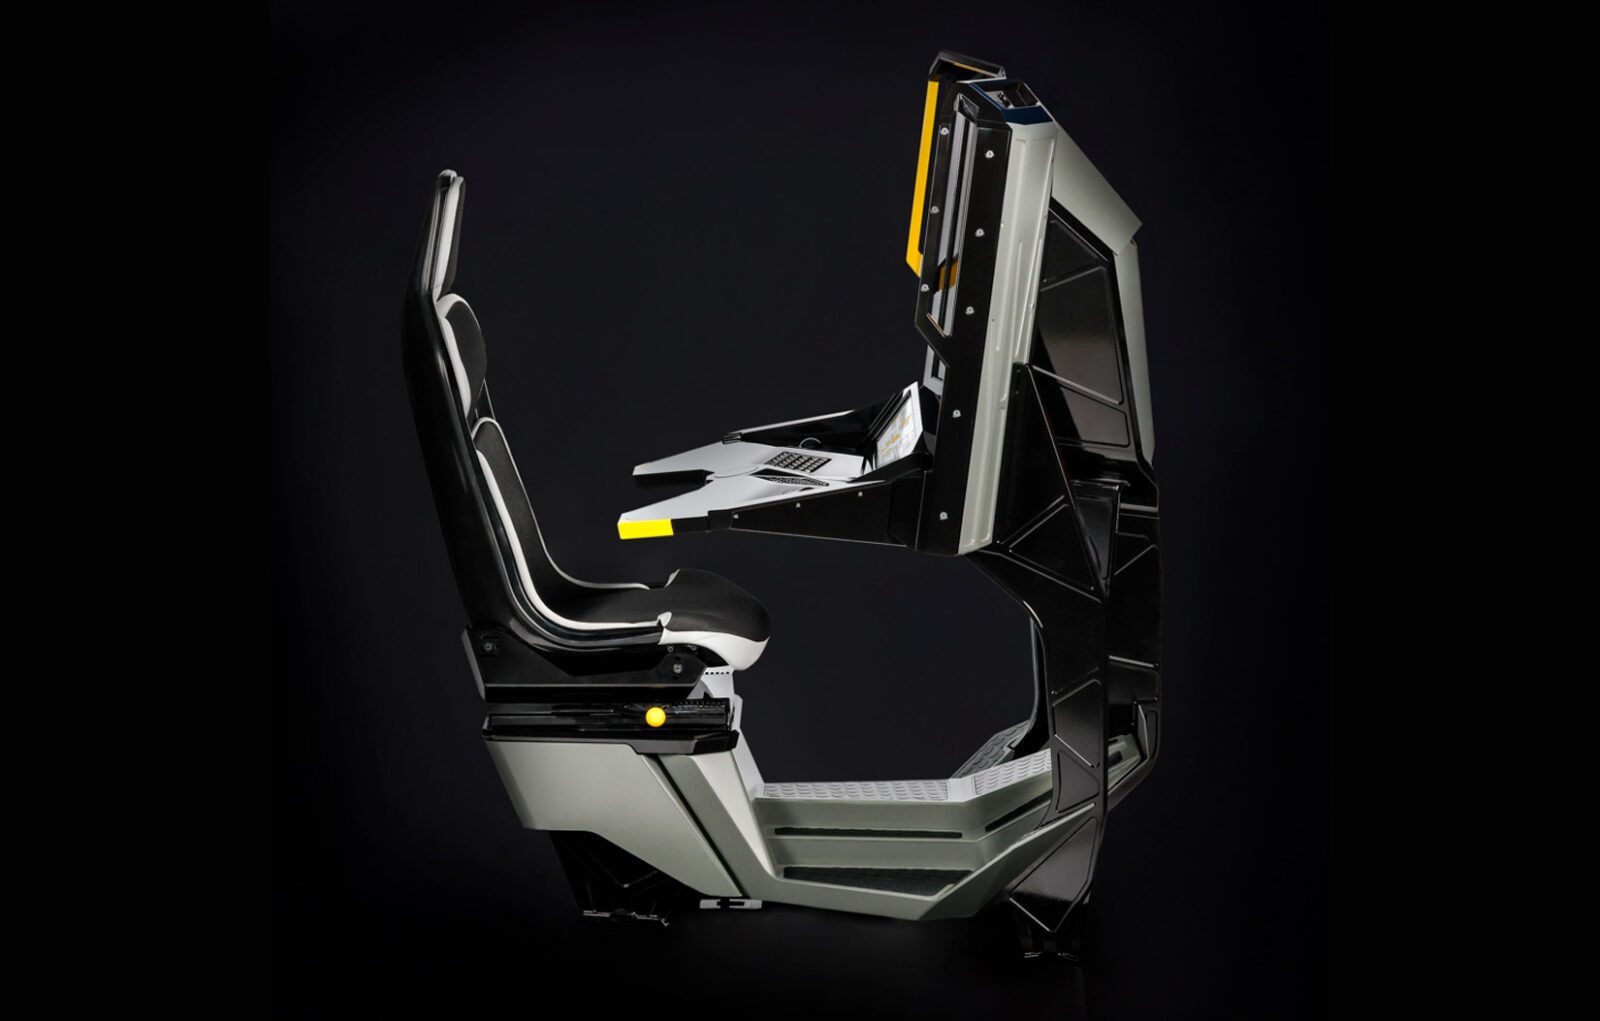 Saab's Future Operator Workspace concept presented for the first time at DSEI